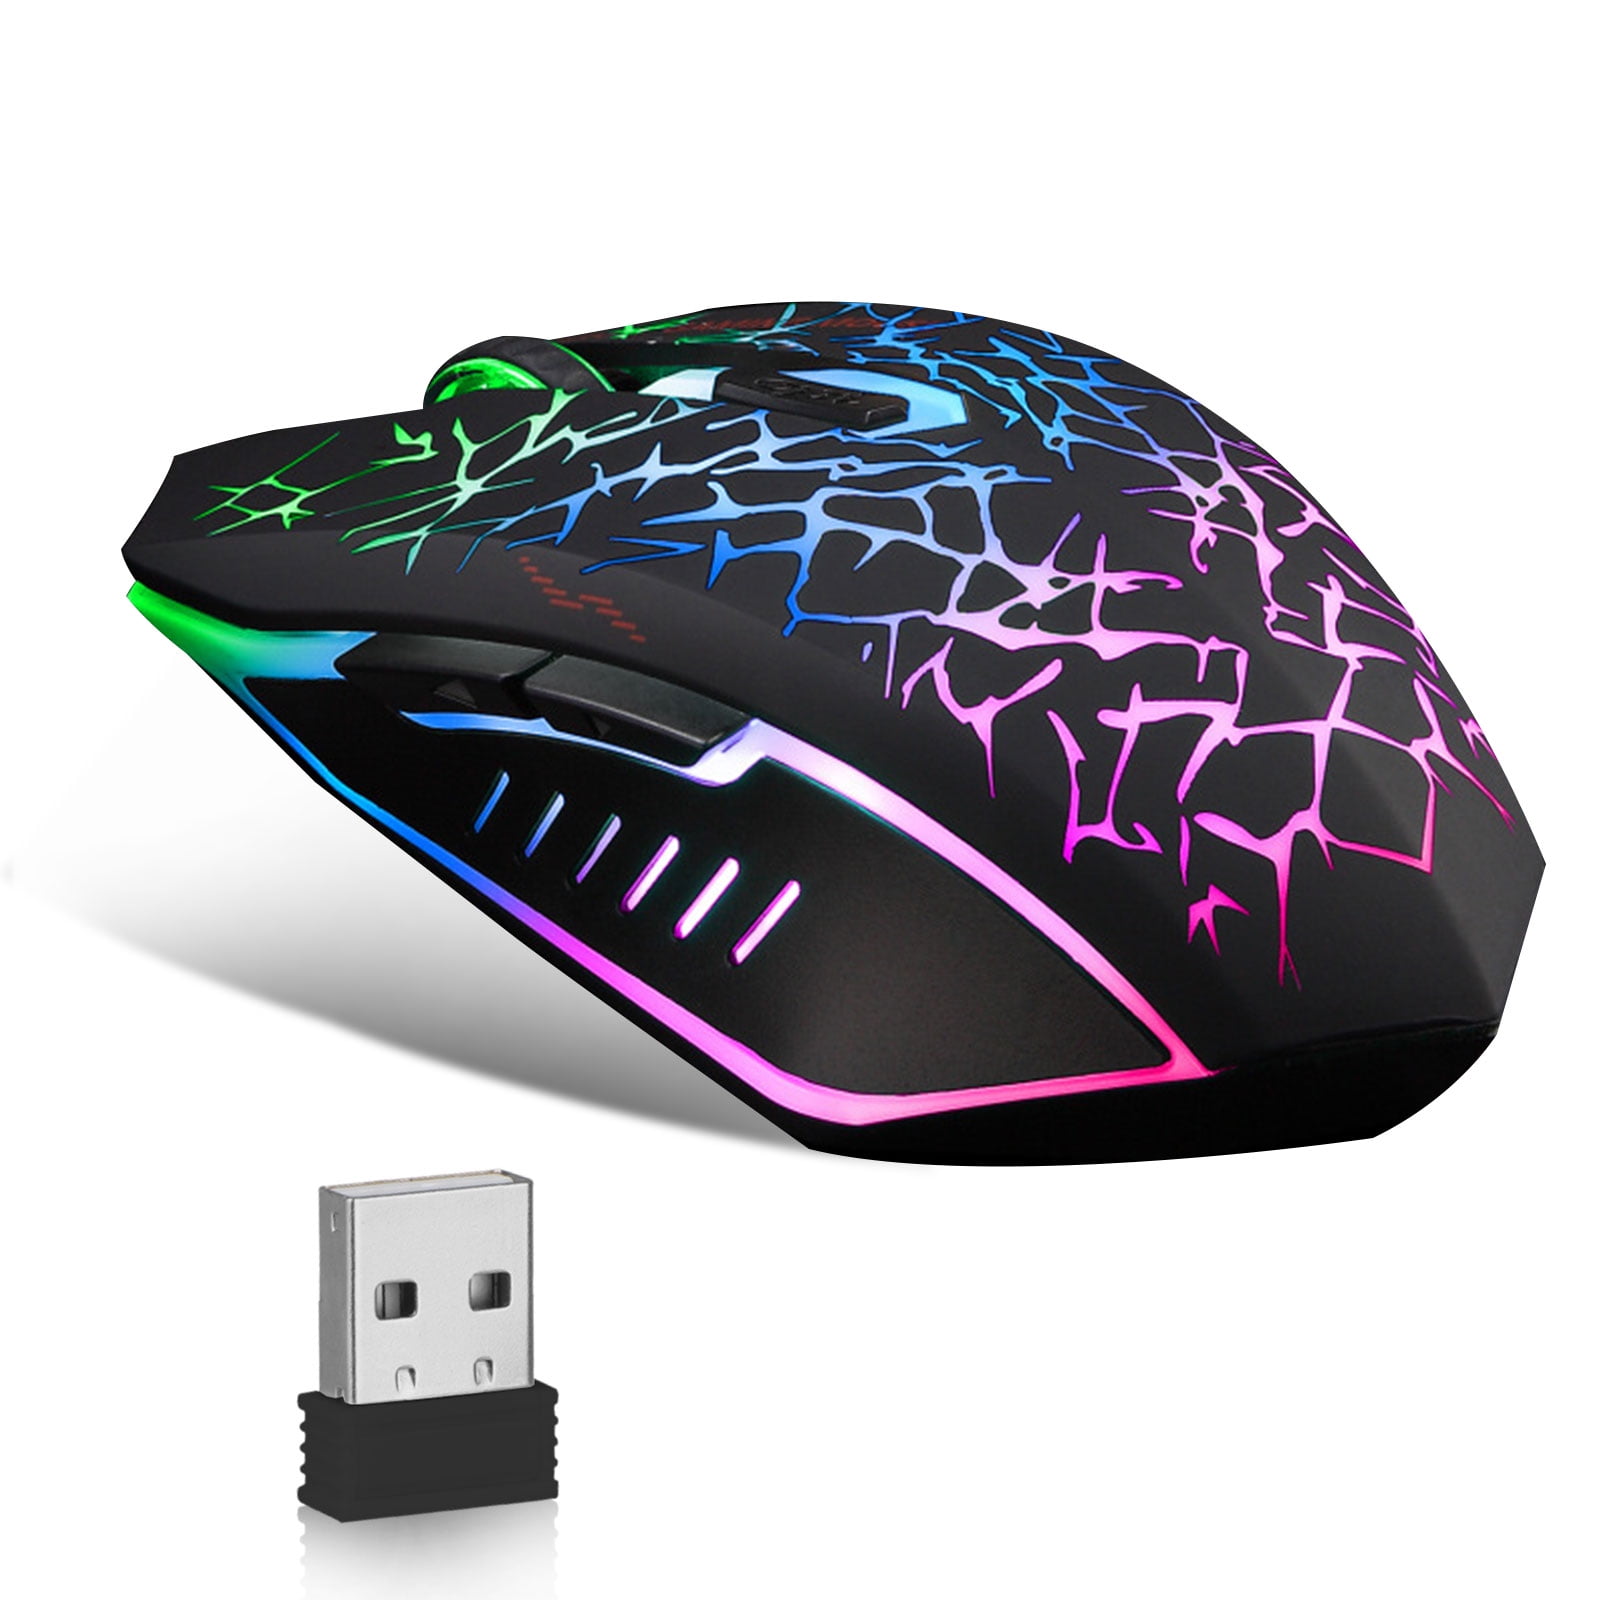 1600 DPI Optical USB LED Wired Gaming Mouse Mice For PC Laptop Computer 